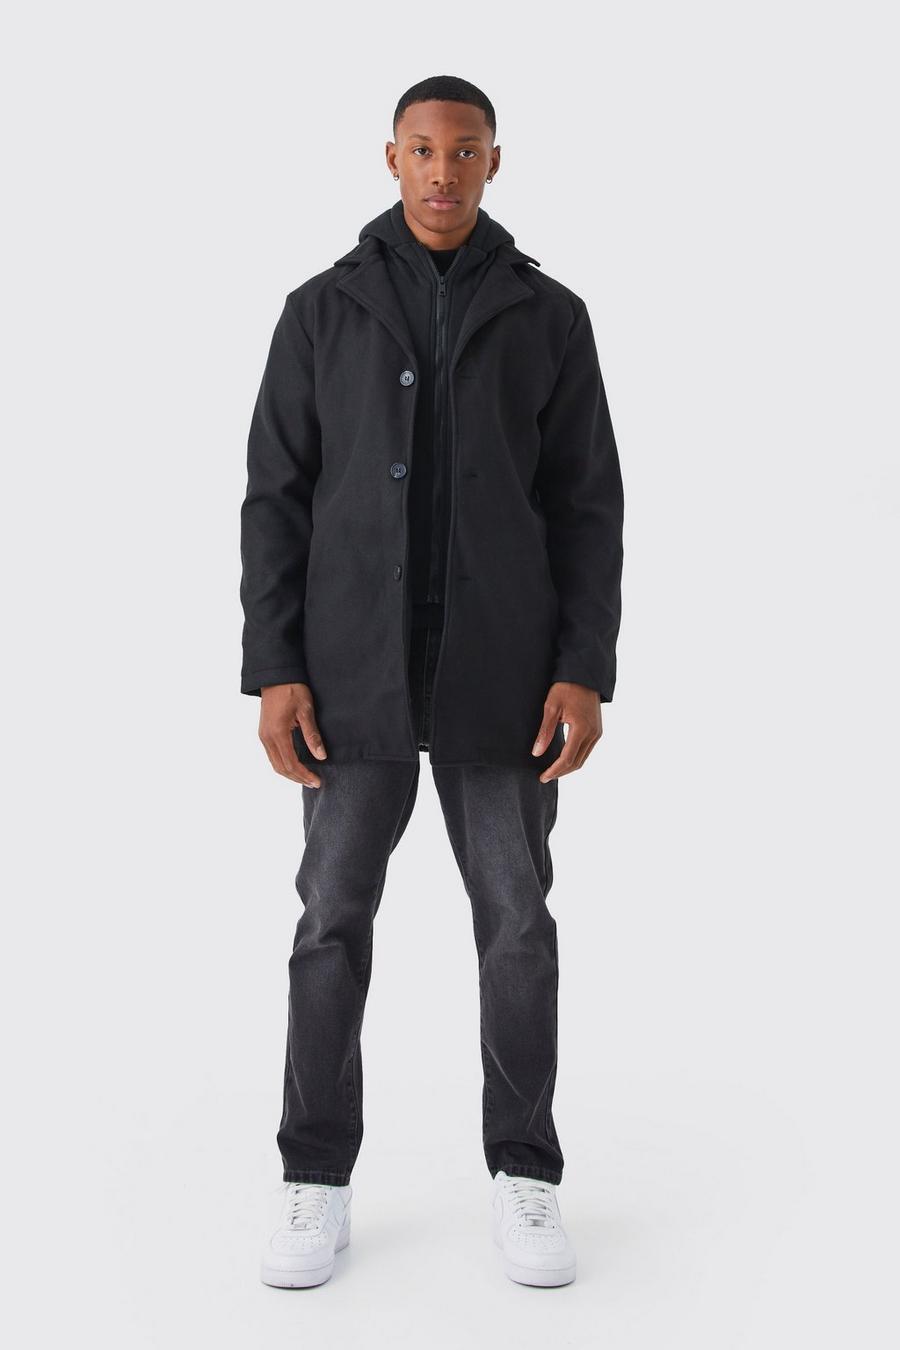 Black Single Breasted Wool Mix Overcoat With Hood